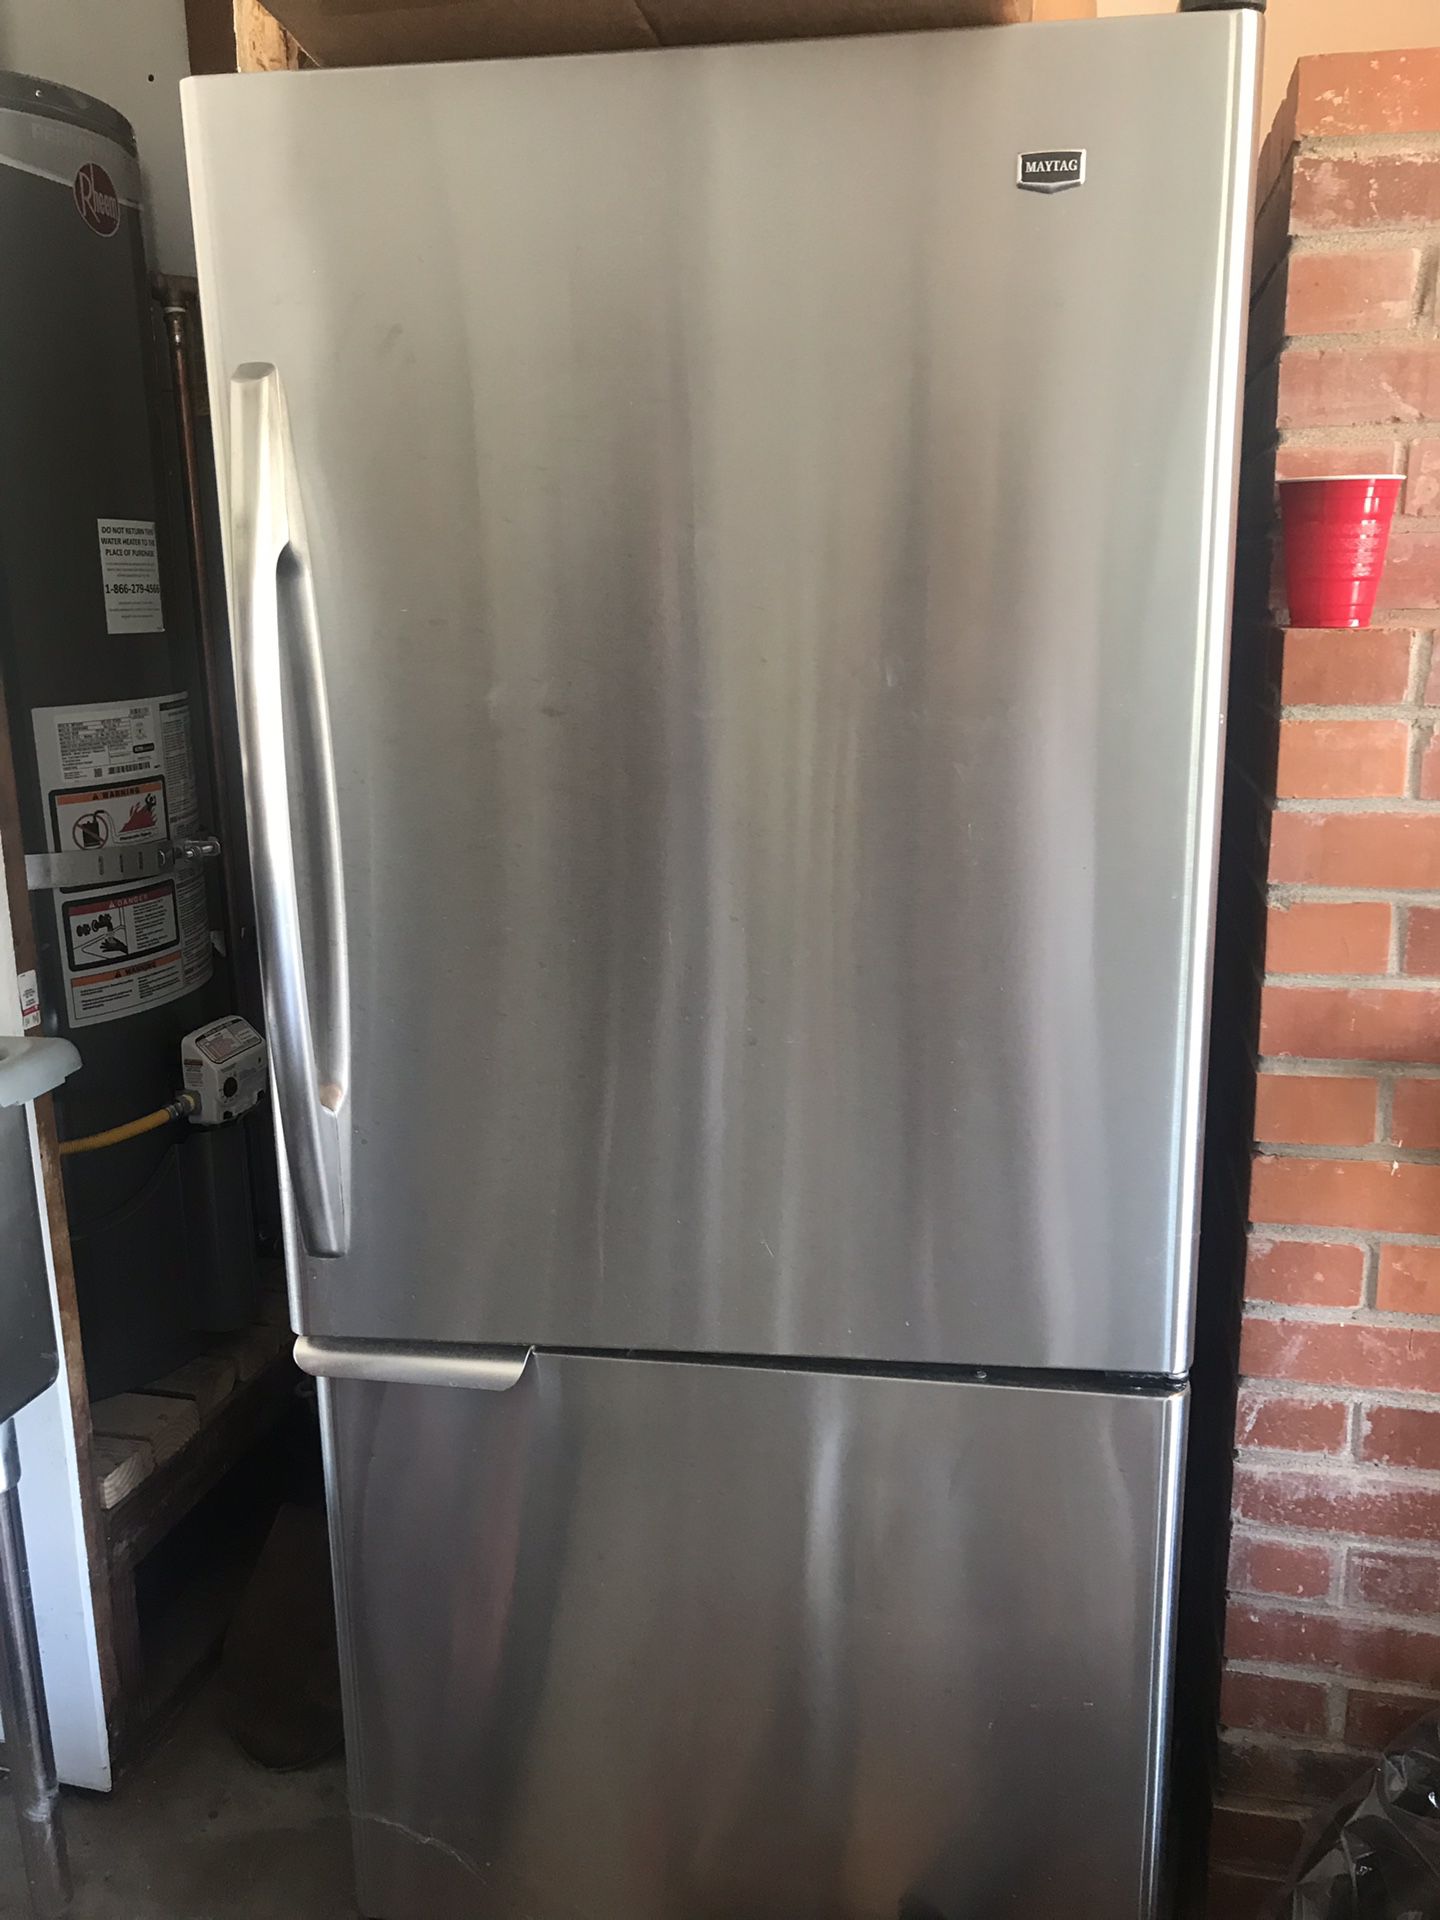 Maytag 19 cu. ft. Single Door Bottom Freezer Refrigerator Stainless Steel - MBR1953YES2